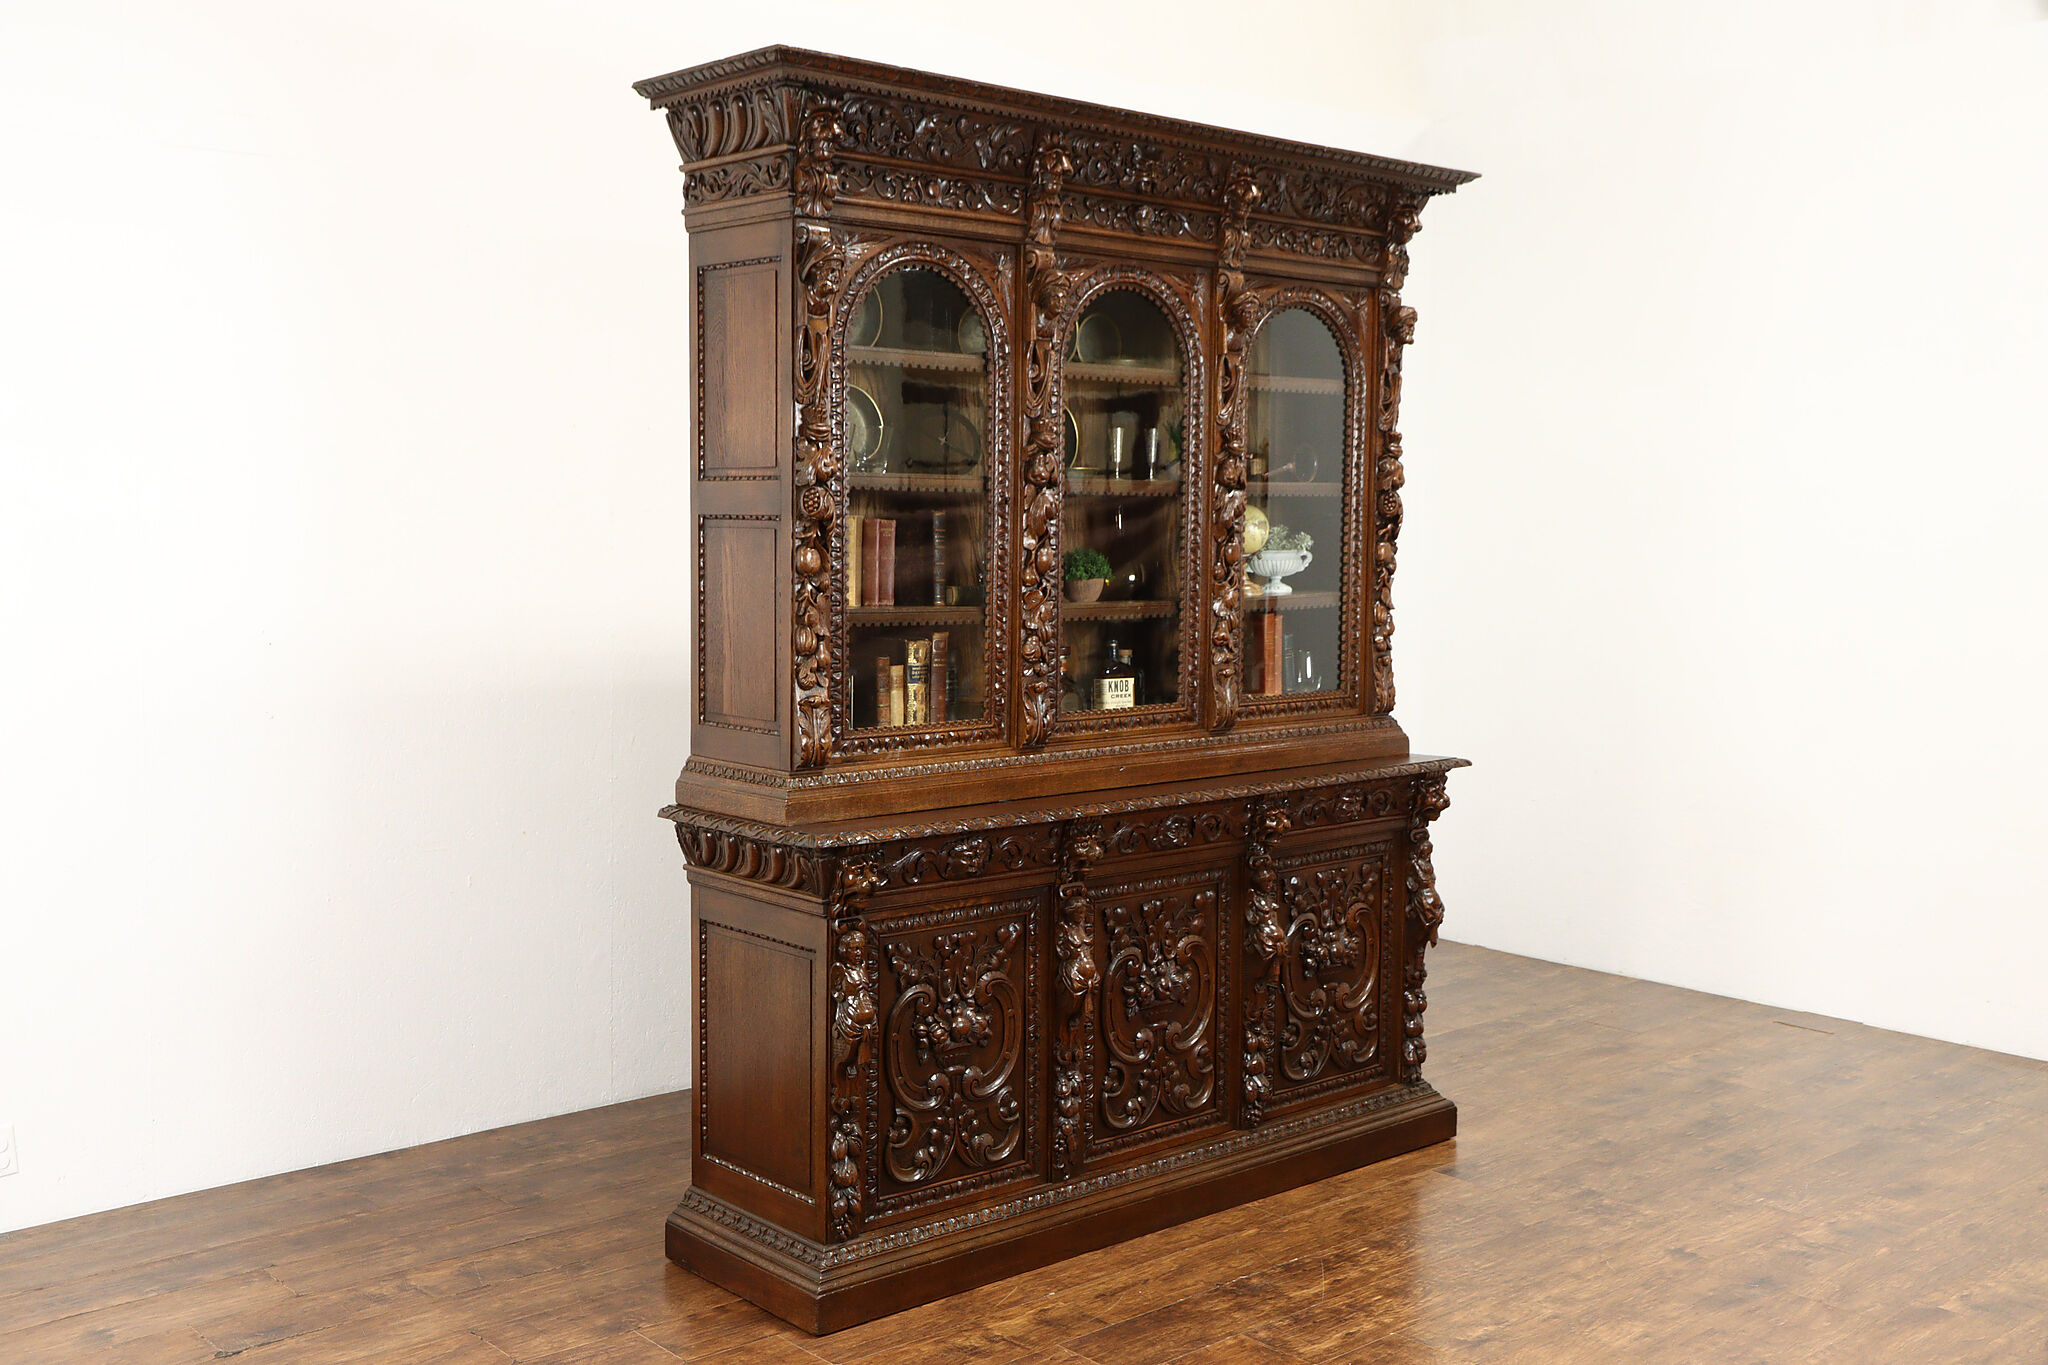 Black Forest Antique Carved Oak Office or Library Bookcase, China Cabinet